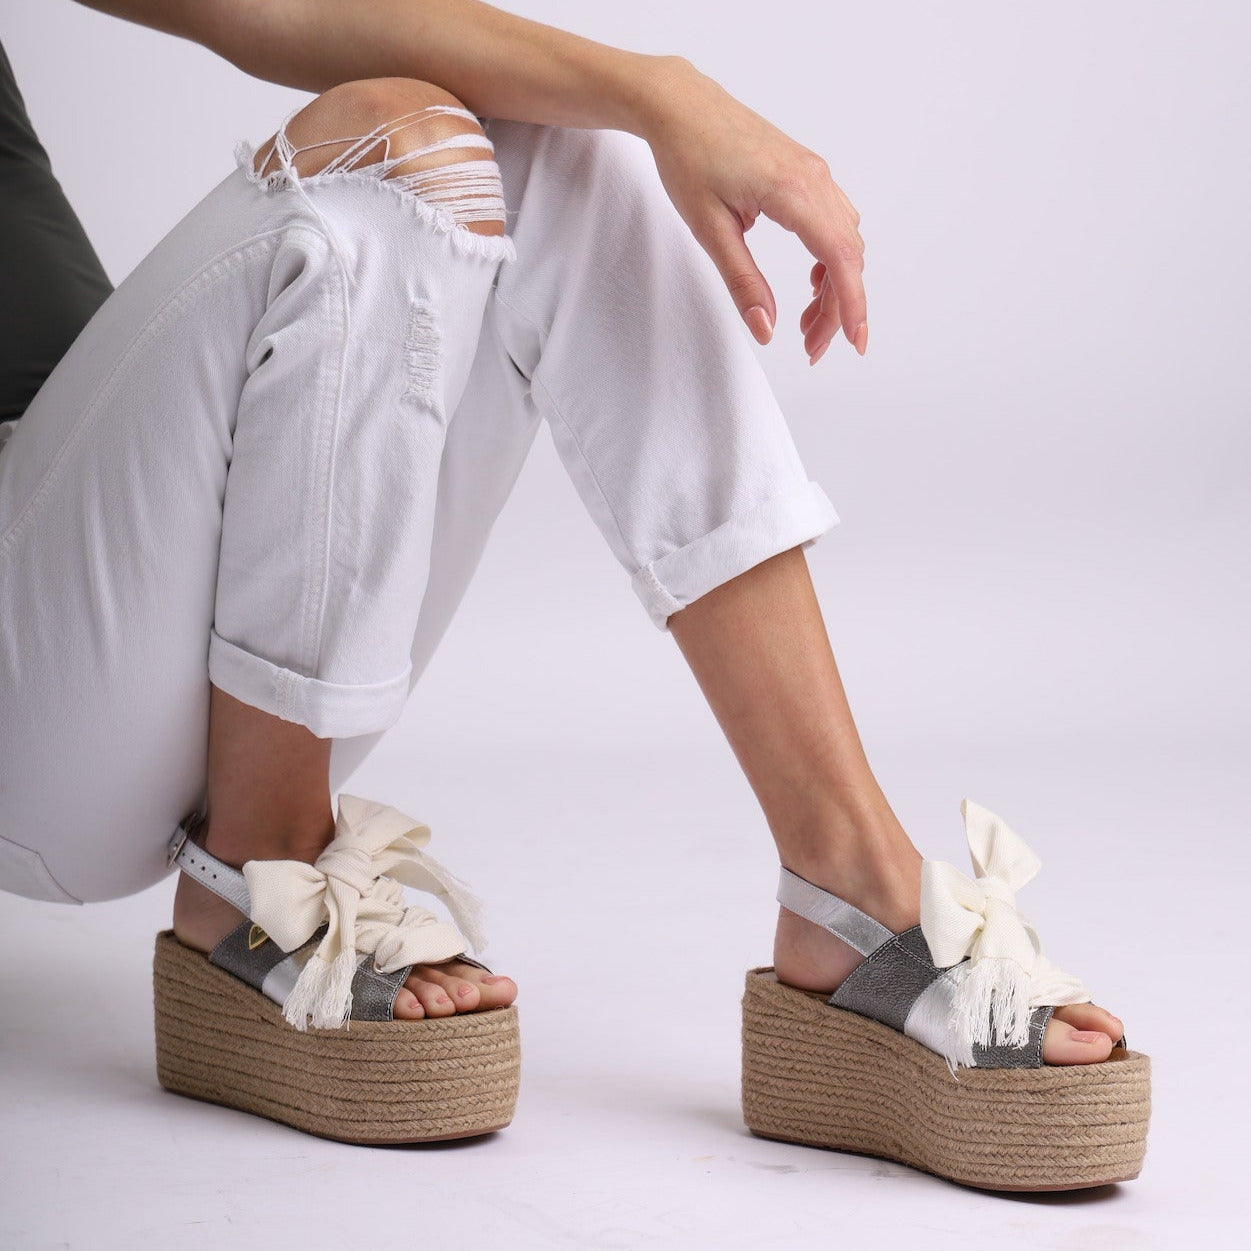 Samantha Espadrilles Plomo by Nataly Mendez. Its base is lined with 2-tone jute Genuine Leather on the upper and back Insole made of genuine leather. Pronounced arch Handmade 3 inch heel weight 2.5 inch platform